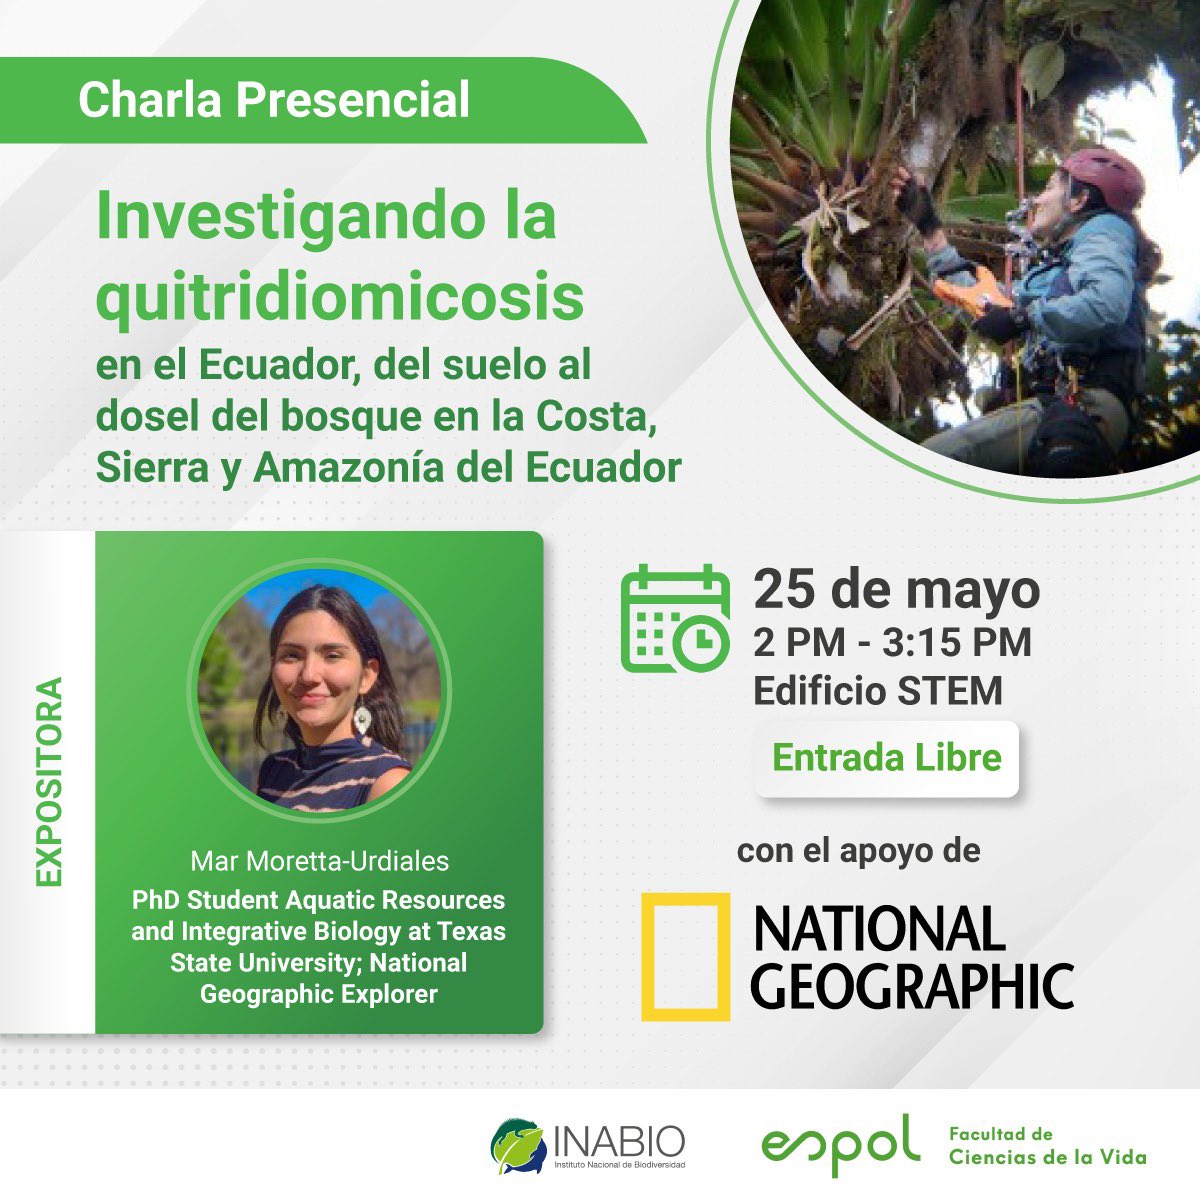 🐸🍄Join us tomorrow at @espol and @INABIO_EC  to know more about the study of frog fungus in the Ecuadorian forest🌳. @NatGeo explorer @anuradelmar enhances the understanding of Quitridiomicosis and its impact on frog biodiversity of the coast, highlands, and Amazon Ecuadorean.